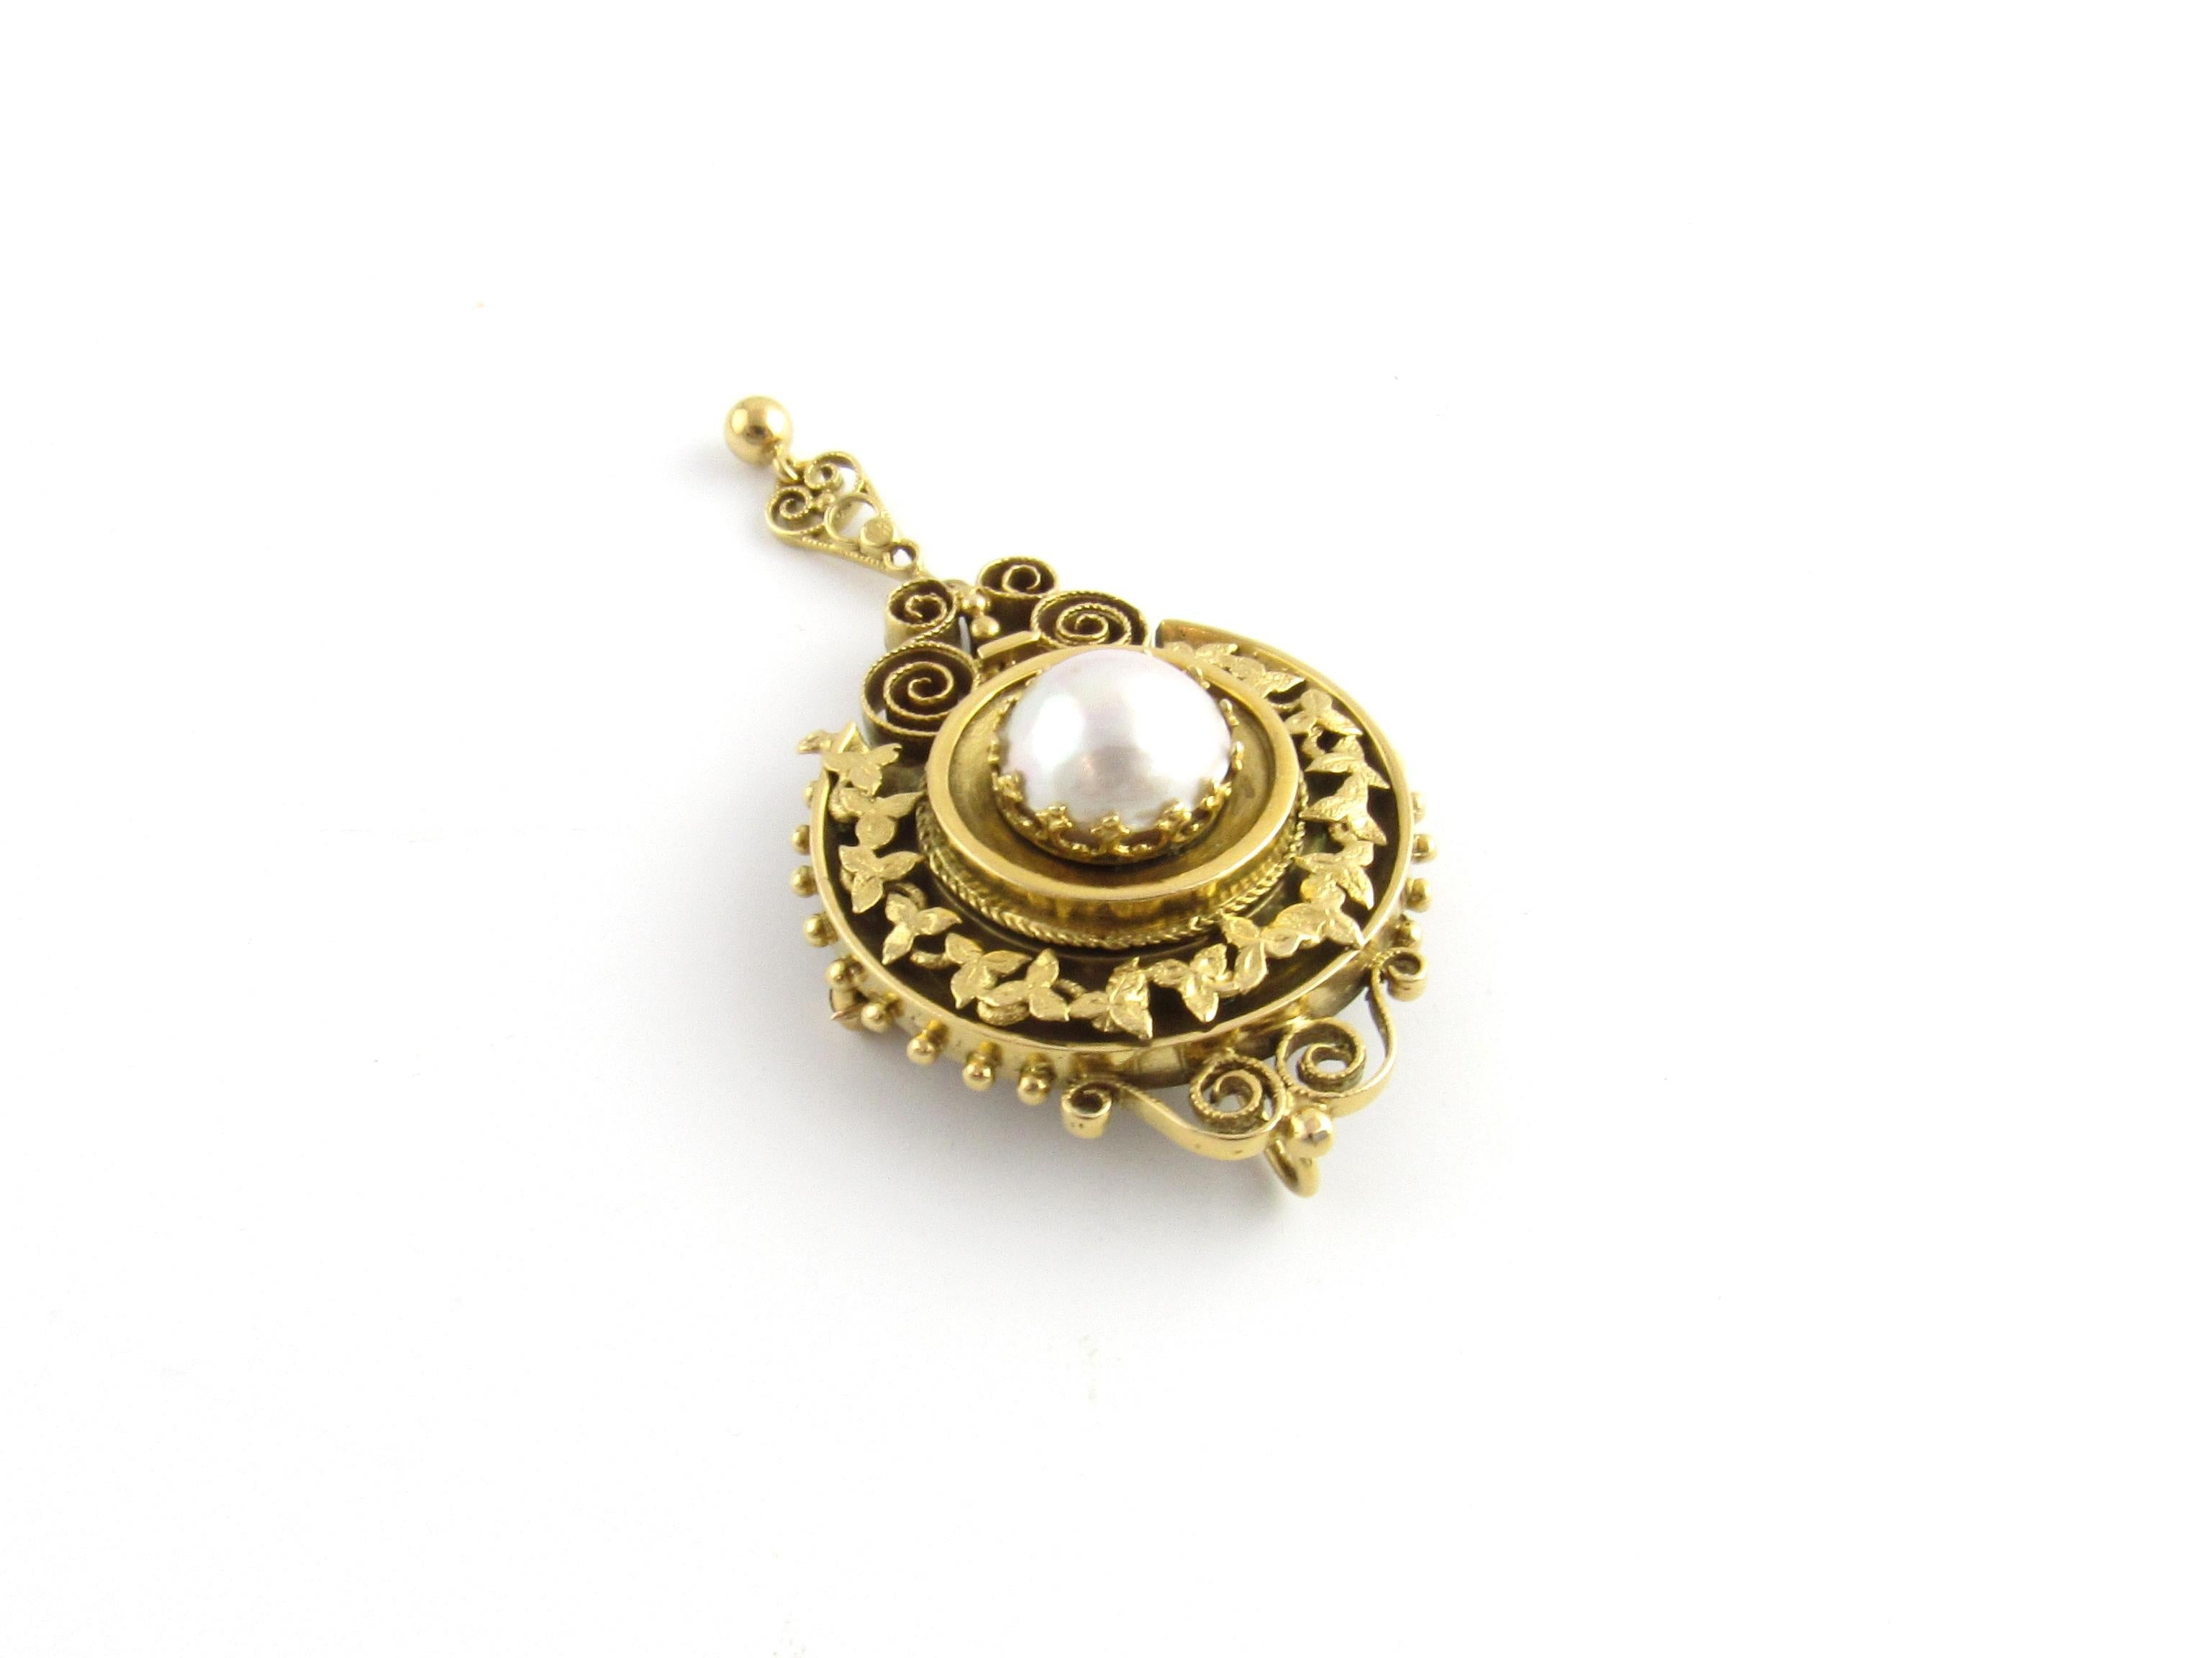 Etruscan Revival 14K Yellow Gold and Mabe Pearl Pin Pendant In Good Condition For Sale In Washington Depot, CT